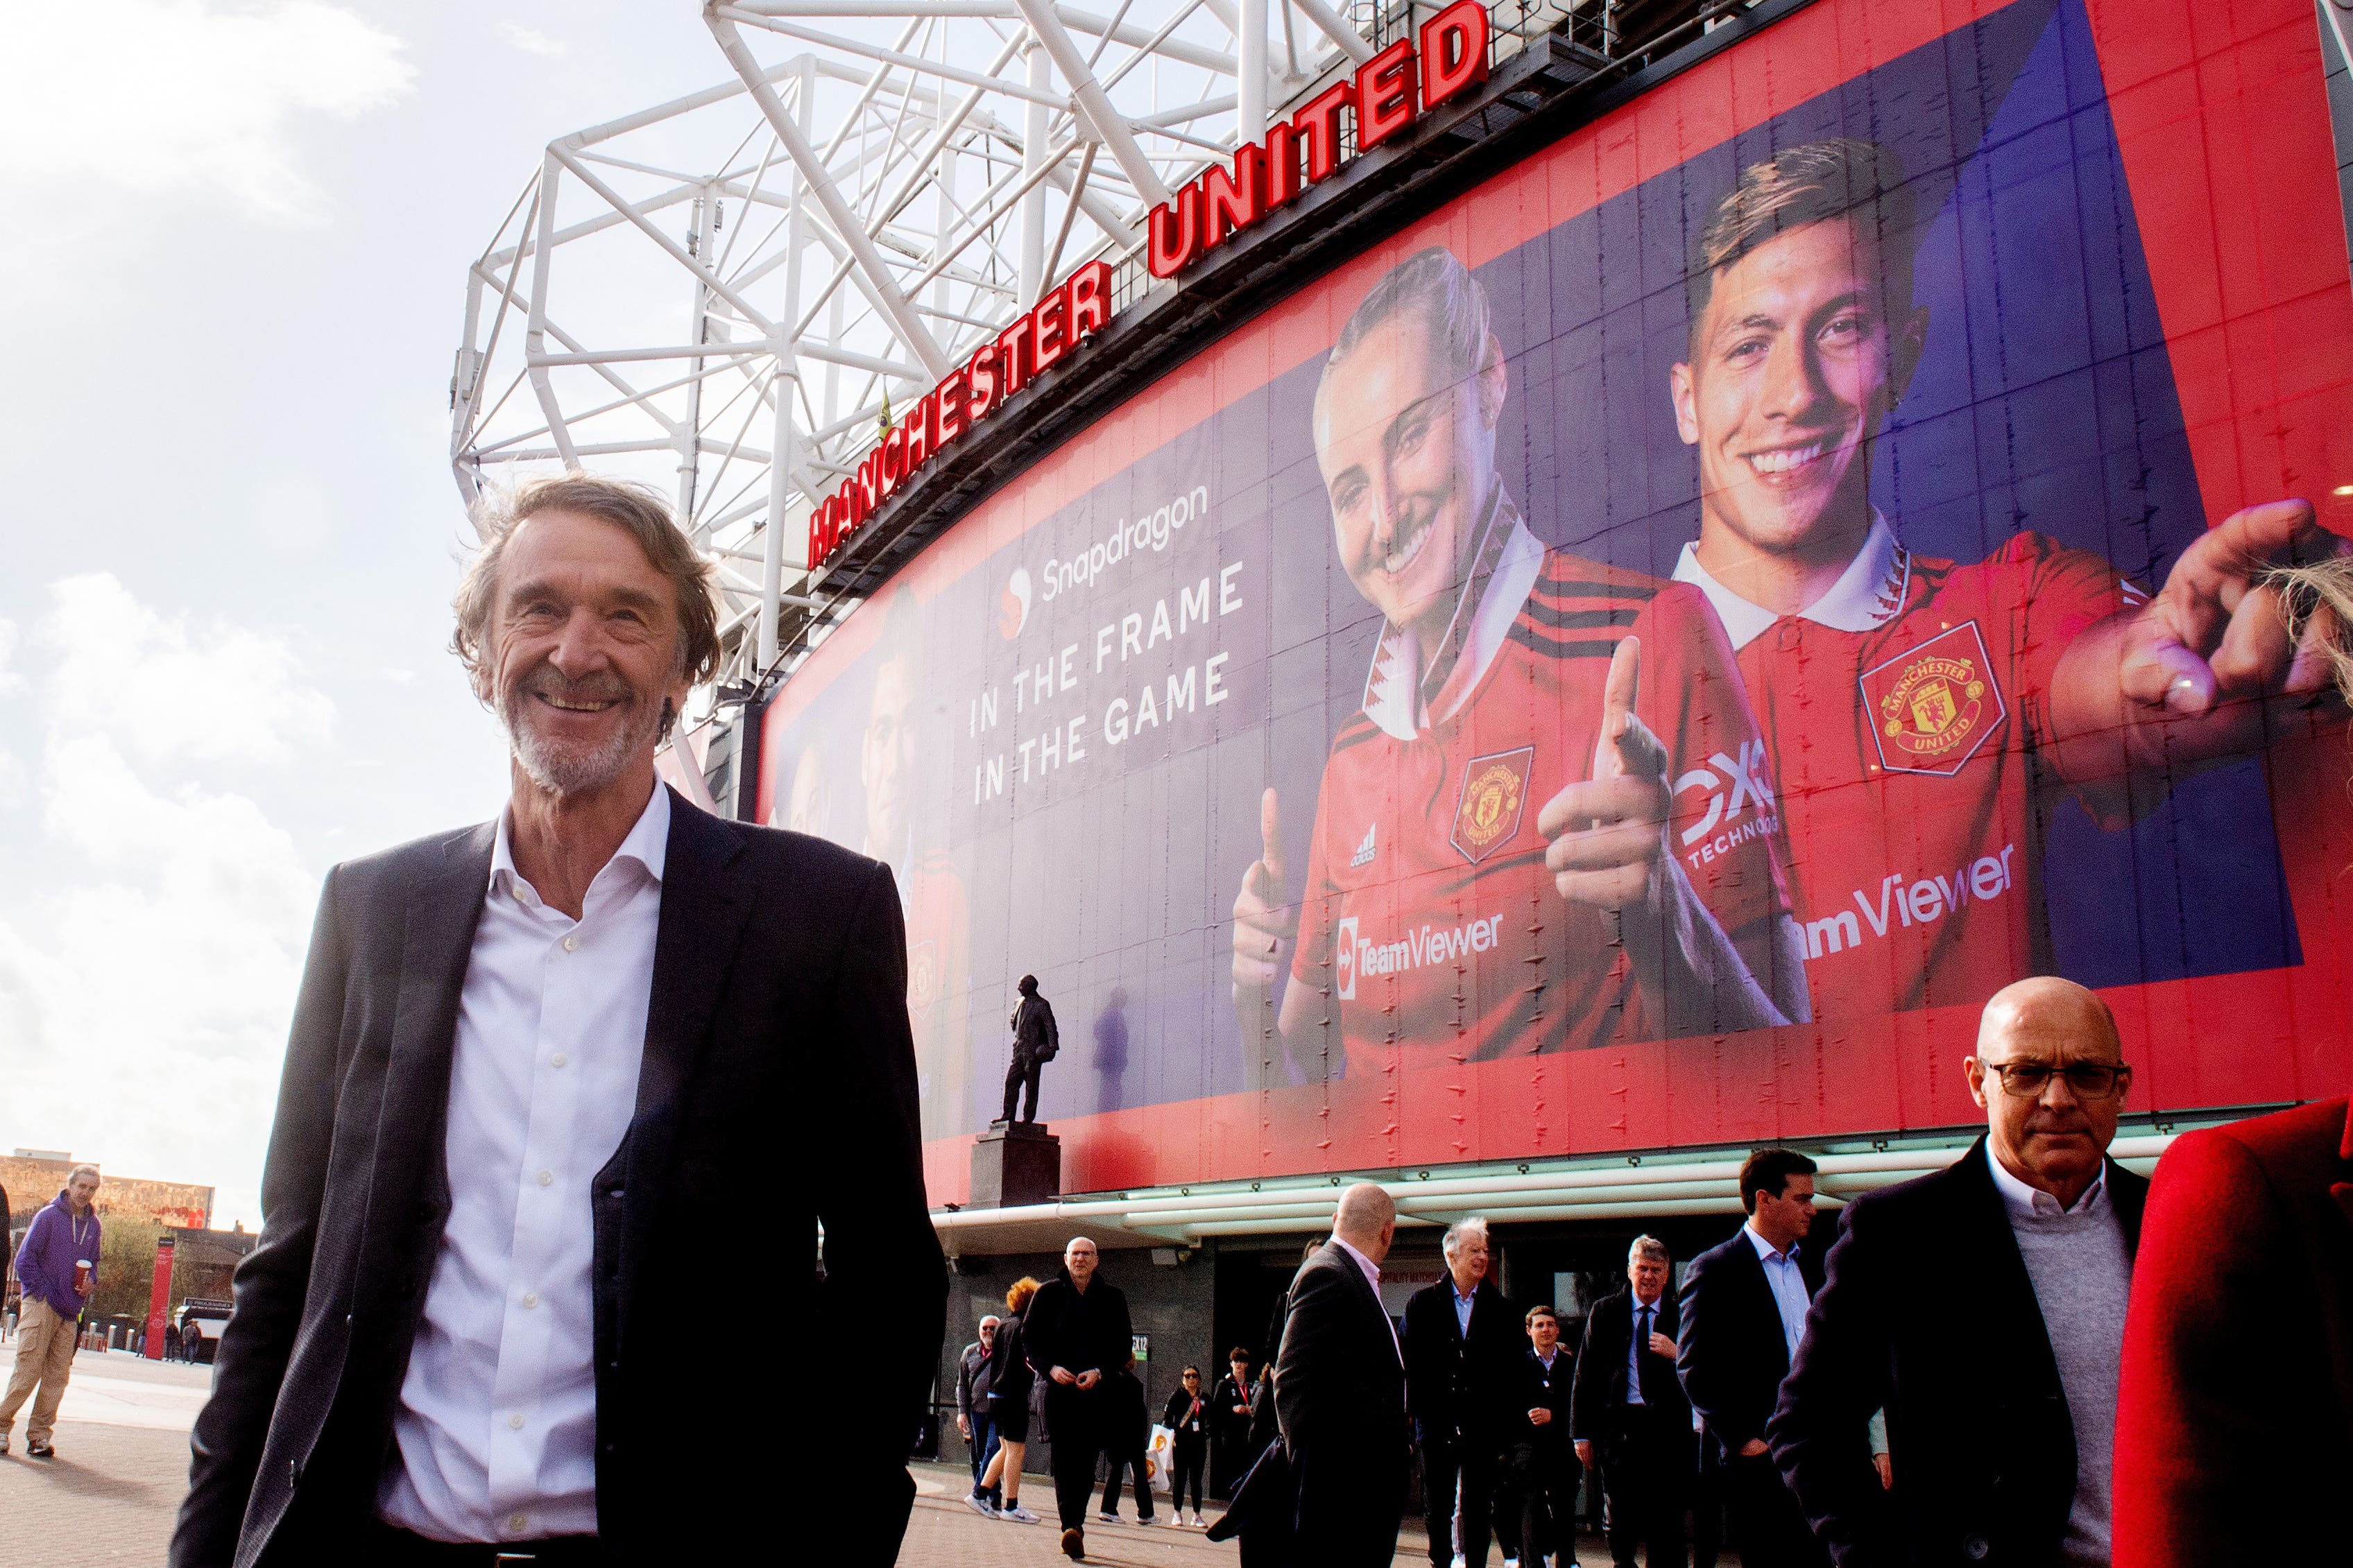 Ratcliffe is close to completing a deal to become a minority shareholder at Manchester United